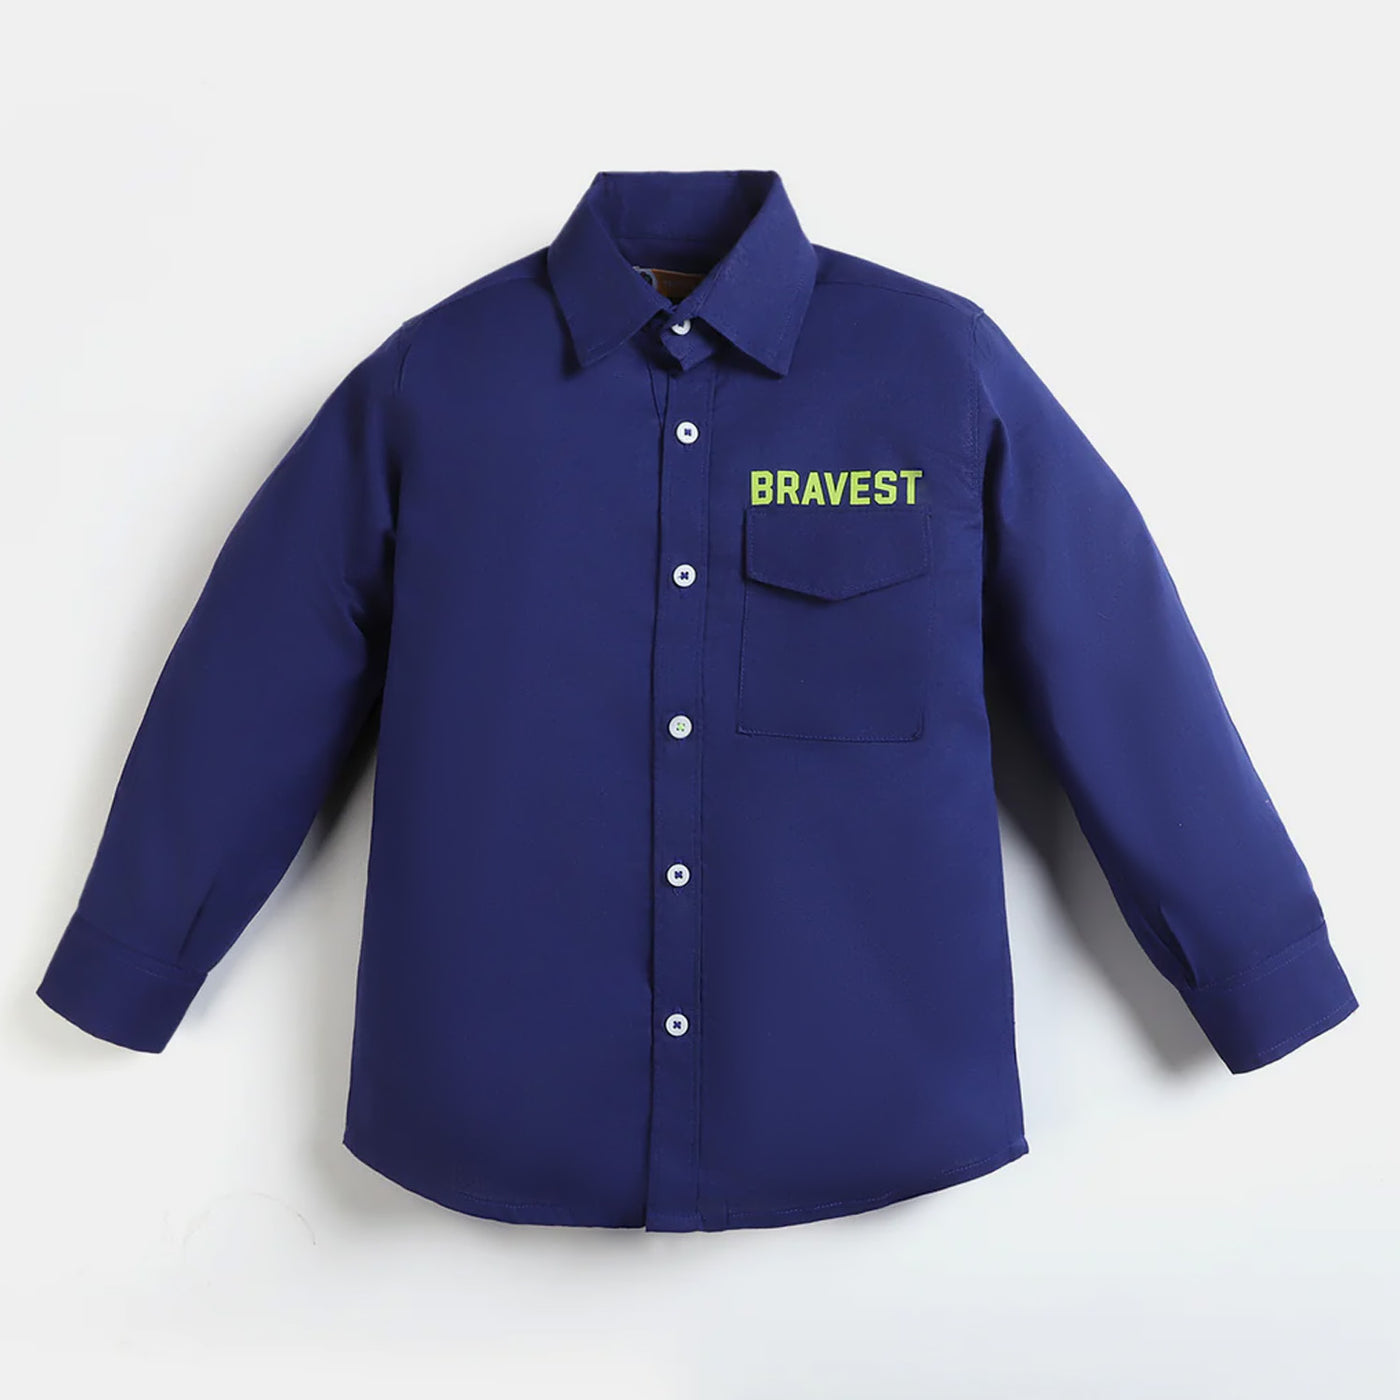 Boys Cotton Casual Shirt F/S Challenge-Navy Blue